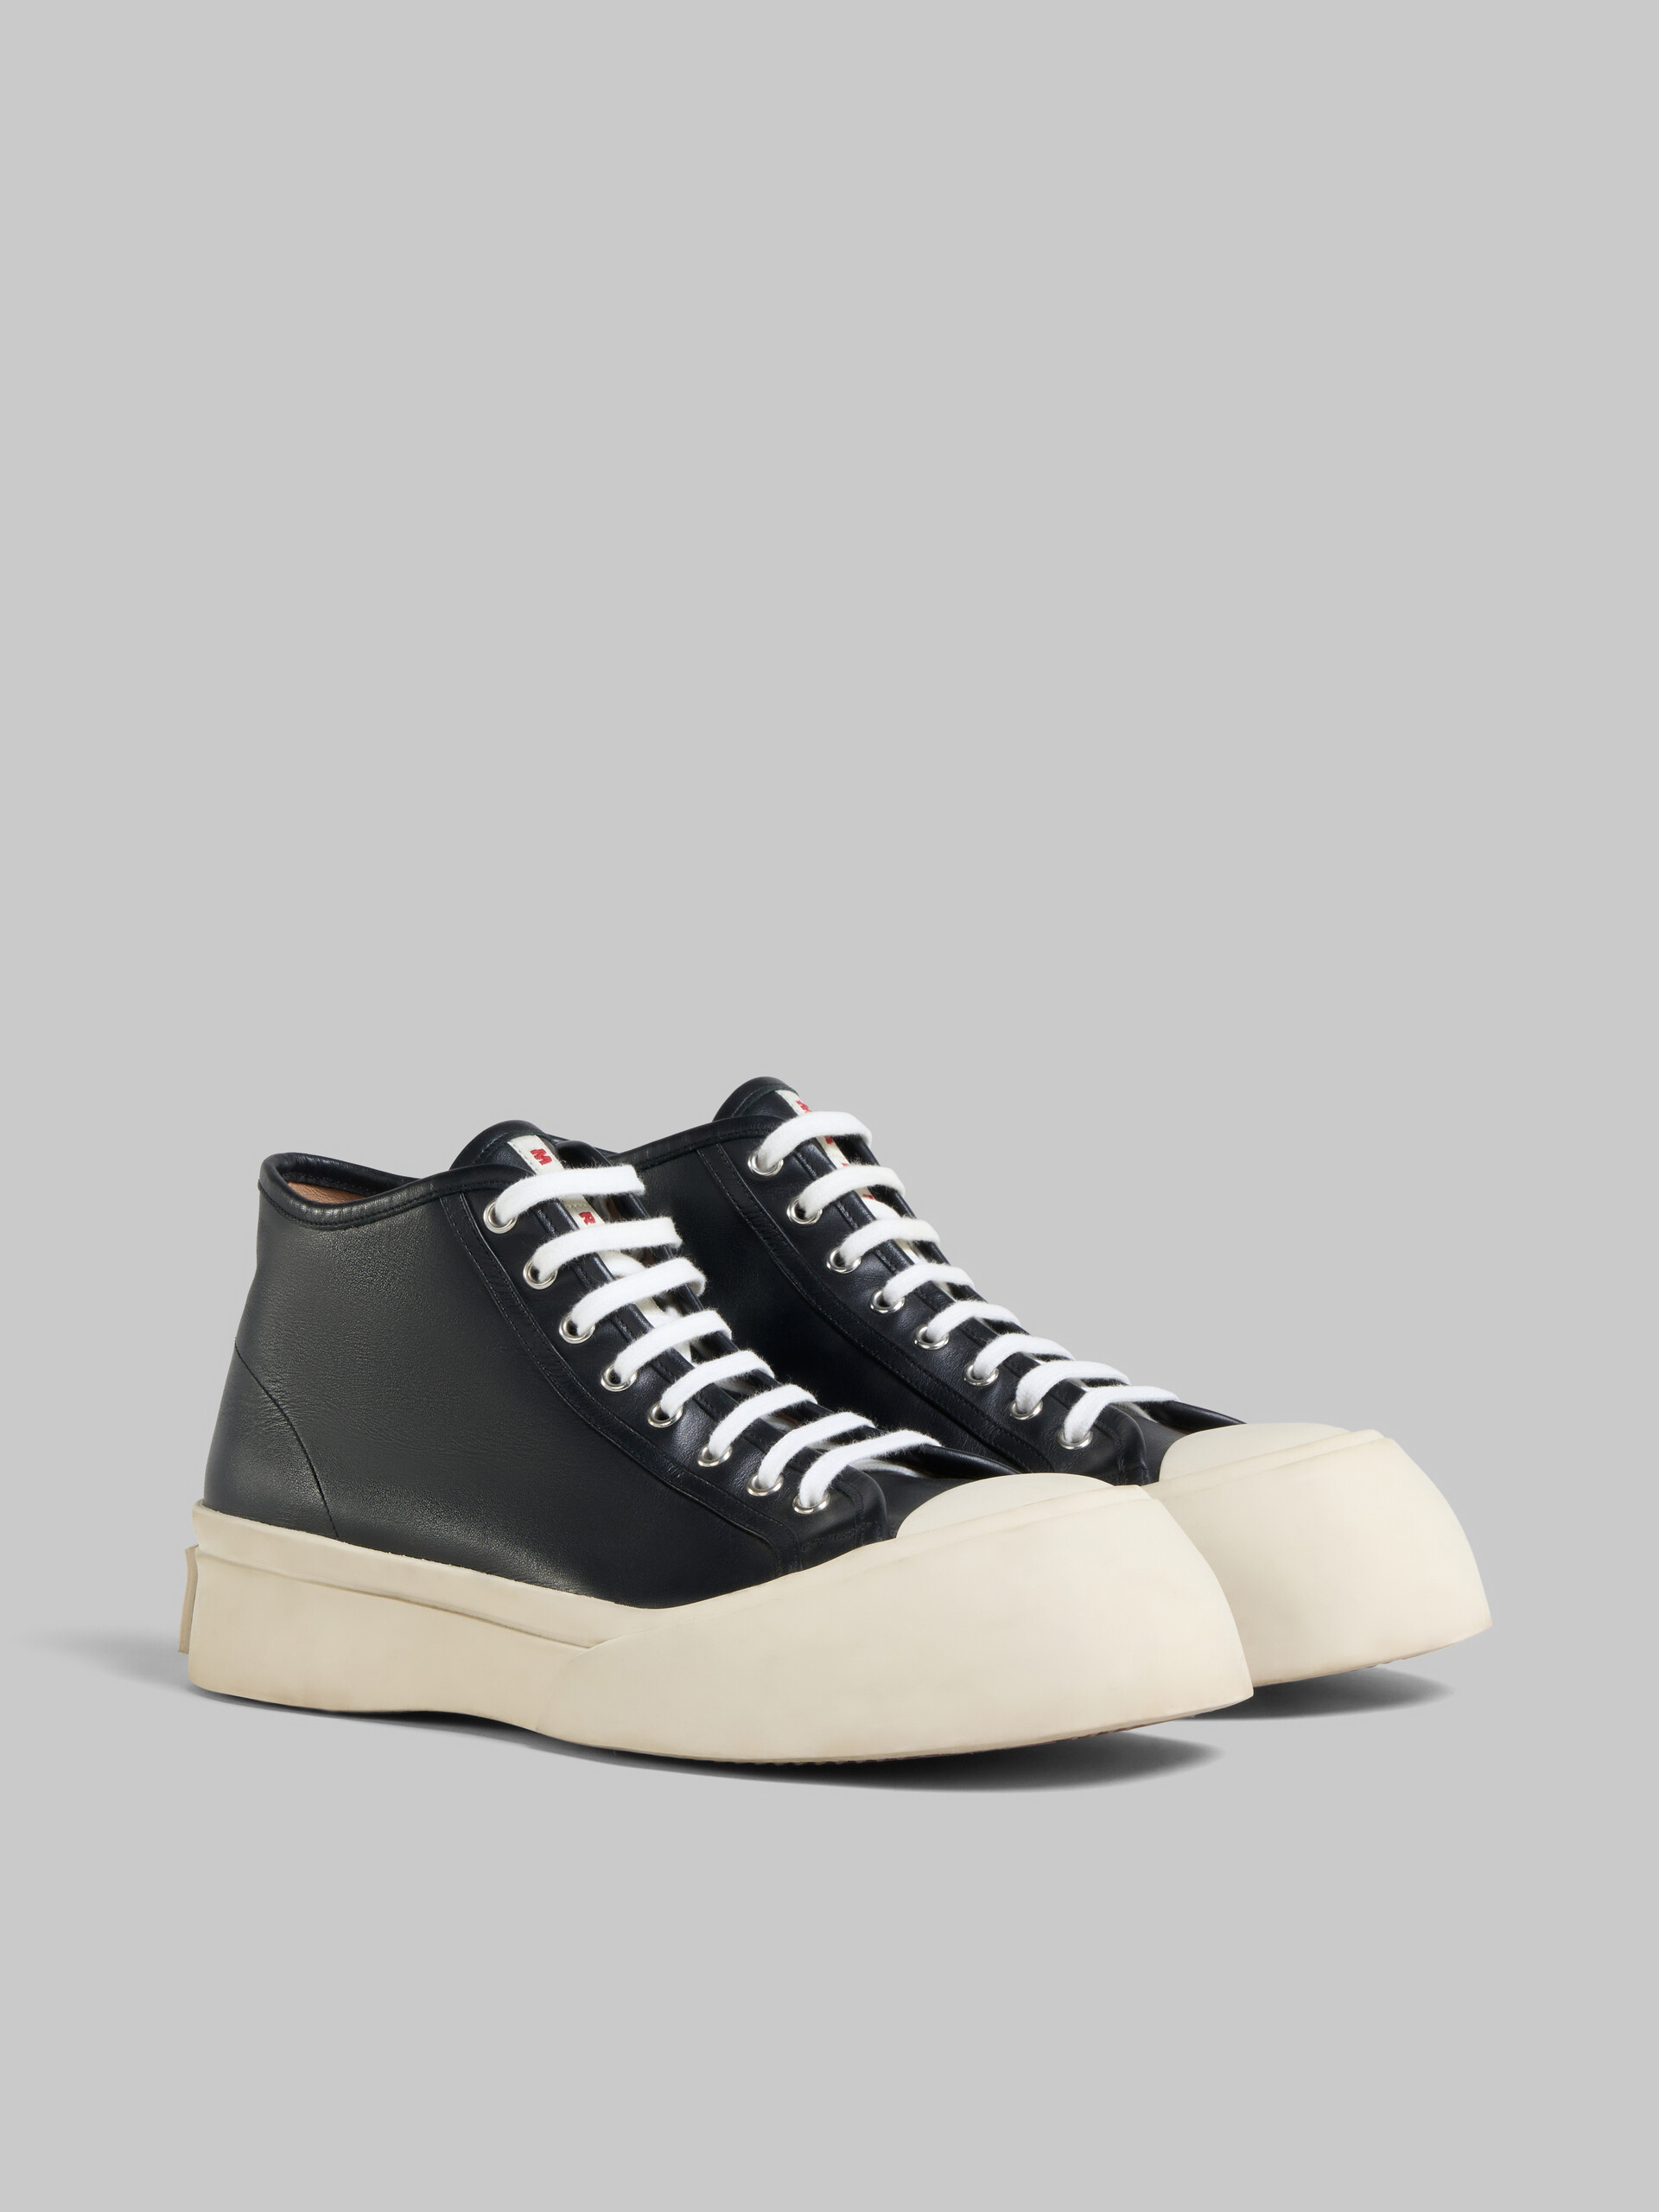 Black nappa leather Pablo high-top sneaker - Sneakers - Image 2